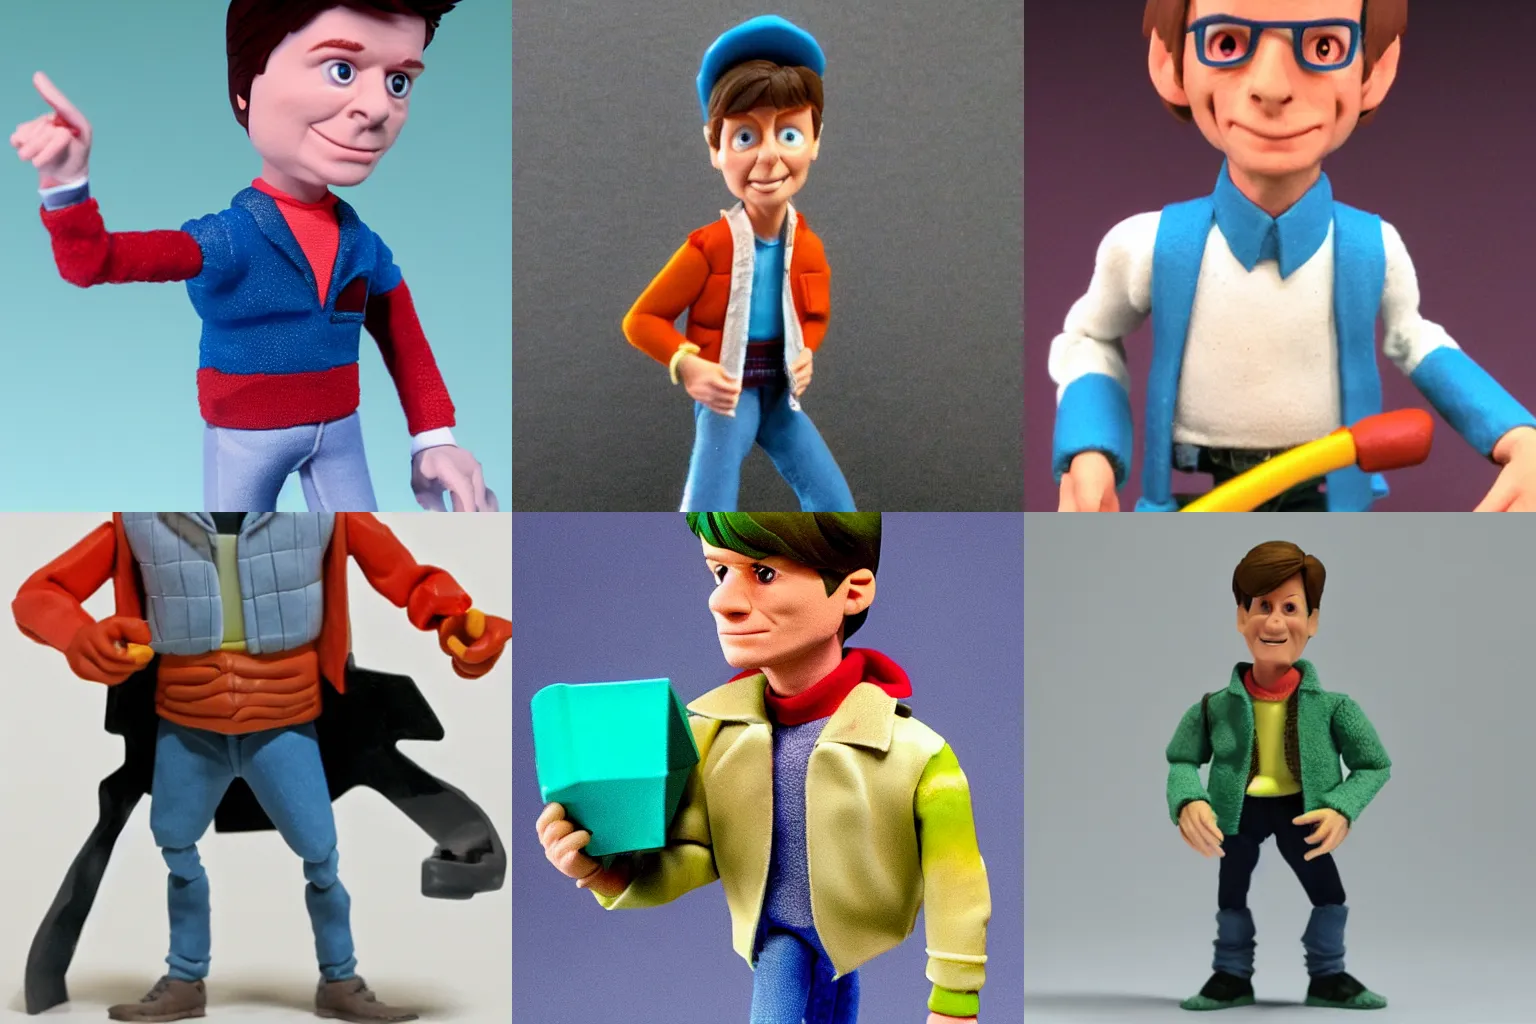 Prompt: claymation figure of Marty McFly